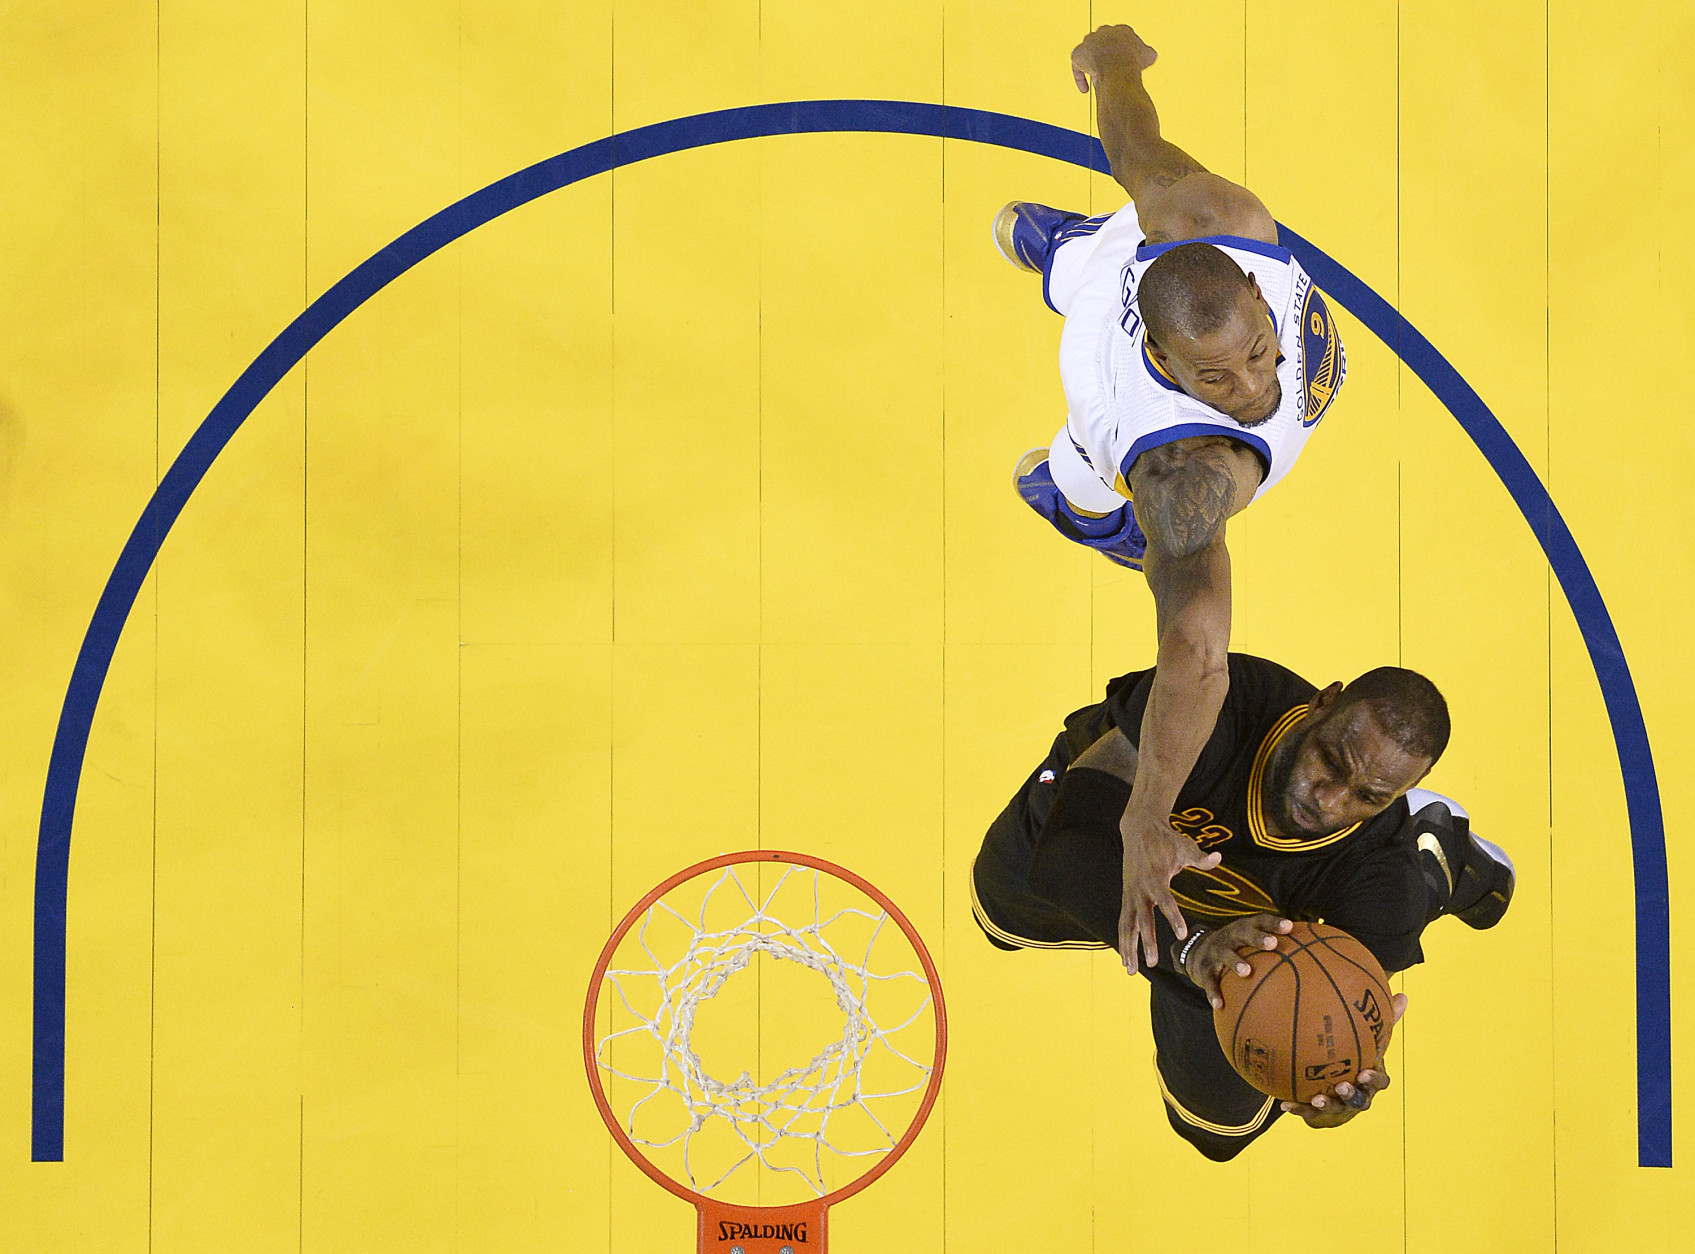 Cleveland Cavaliers forward LeBron James, bottom, shoots against Golden State Warriors forward Andre Iguodala during the second half of Game 7 of basketball's NBA Finals in Oakland, Calif., Sunday, June 19, 2016. The Cavaliers won 93-89. (John G. Mabanglo, European Pressphoto Agency via AP, Pool)